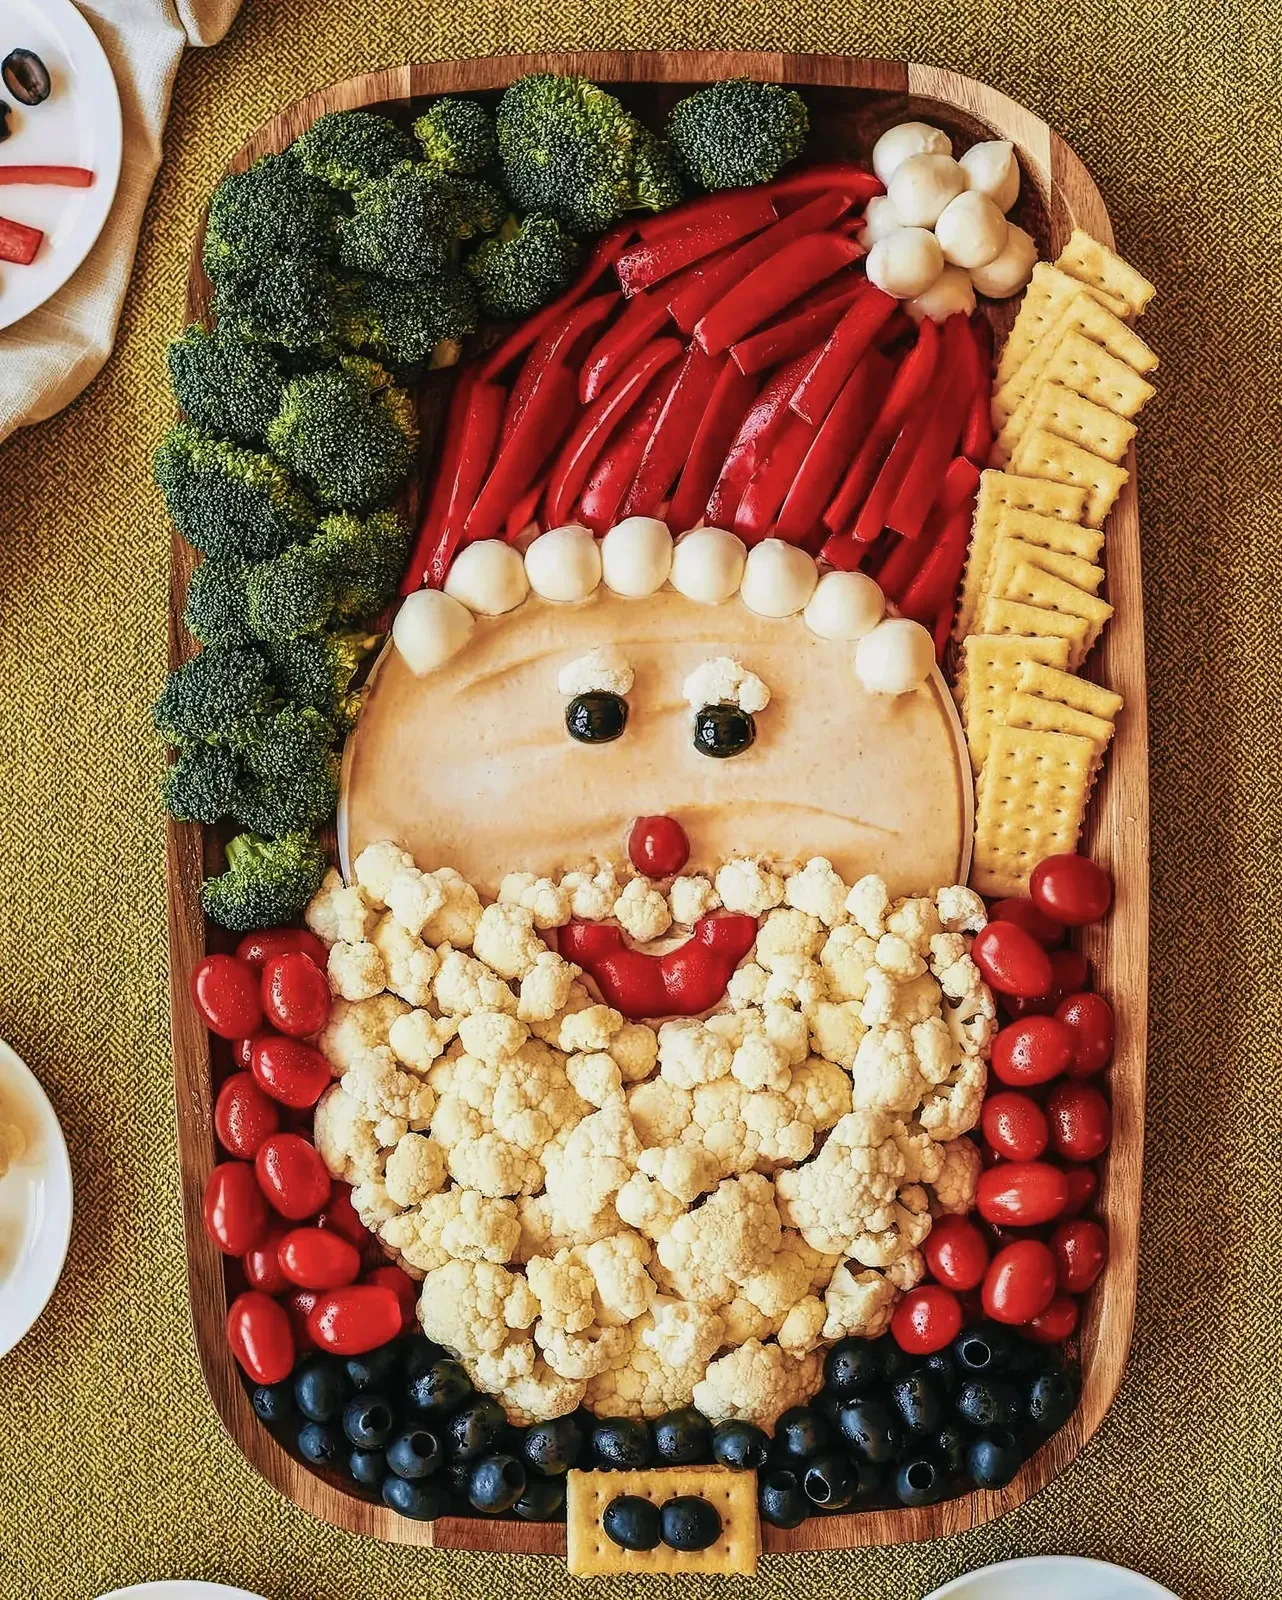 Creative presentation of a variety of nutritious foods arranged on a tray to form a whimsical face